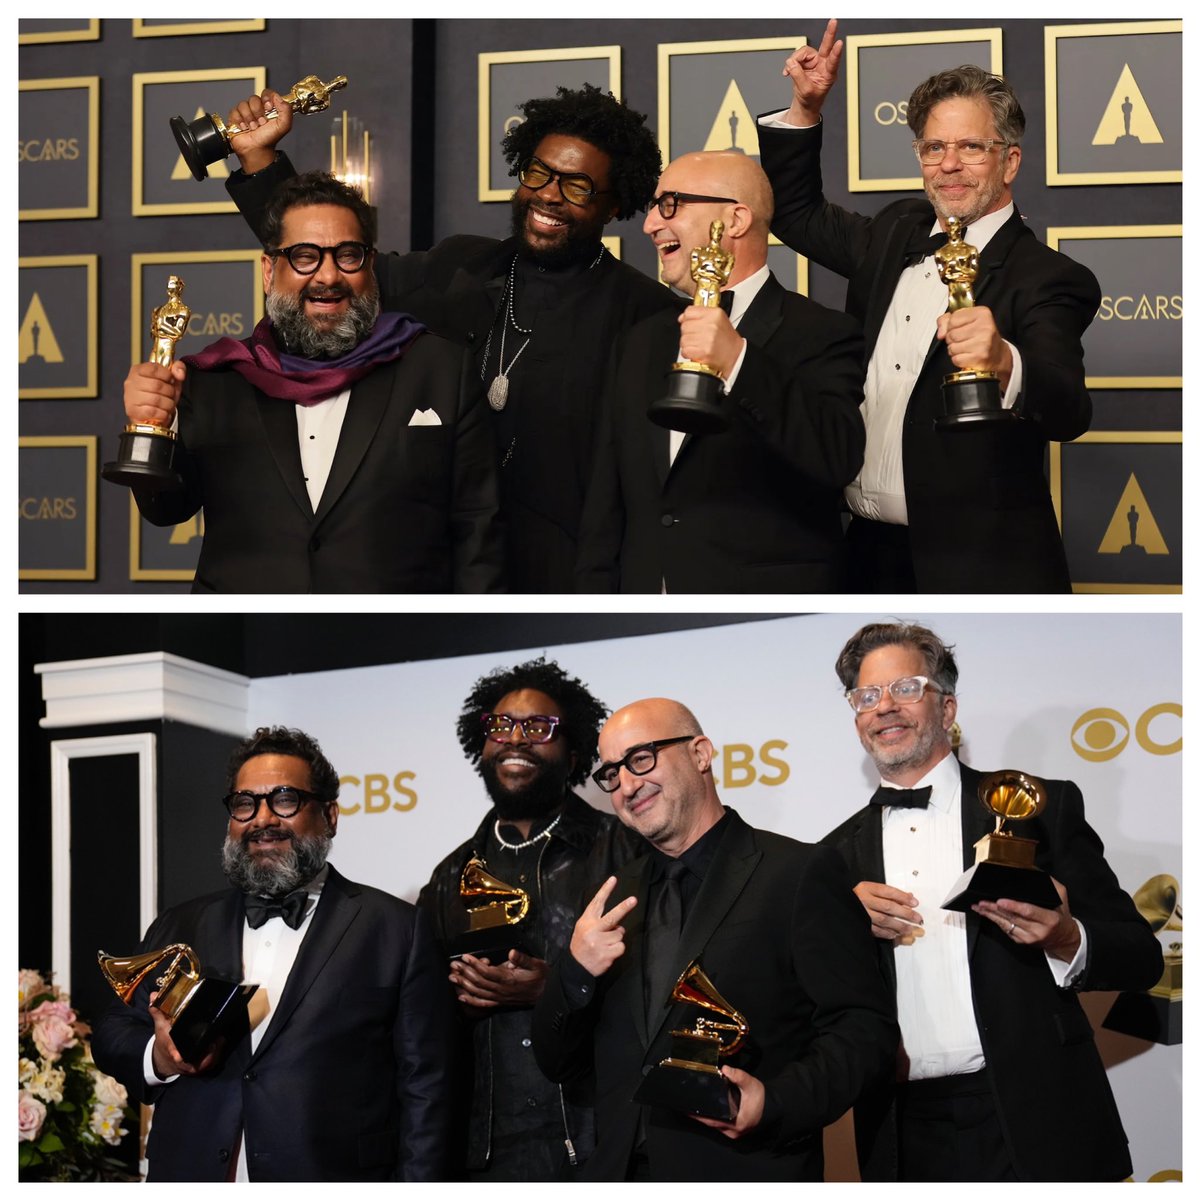 It makes me happy that Questlove, Joseph Patel, David Dinerstein and Robert Fyvolent won an Oscar and a Grammy this week. #summerofsoulmovie #sowelldeserved @summerofsoul @questlove